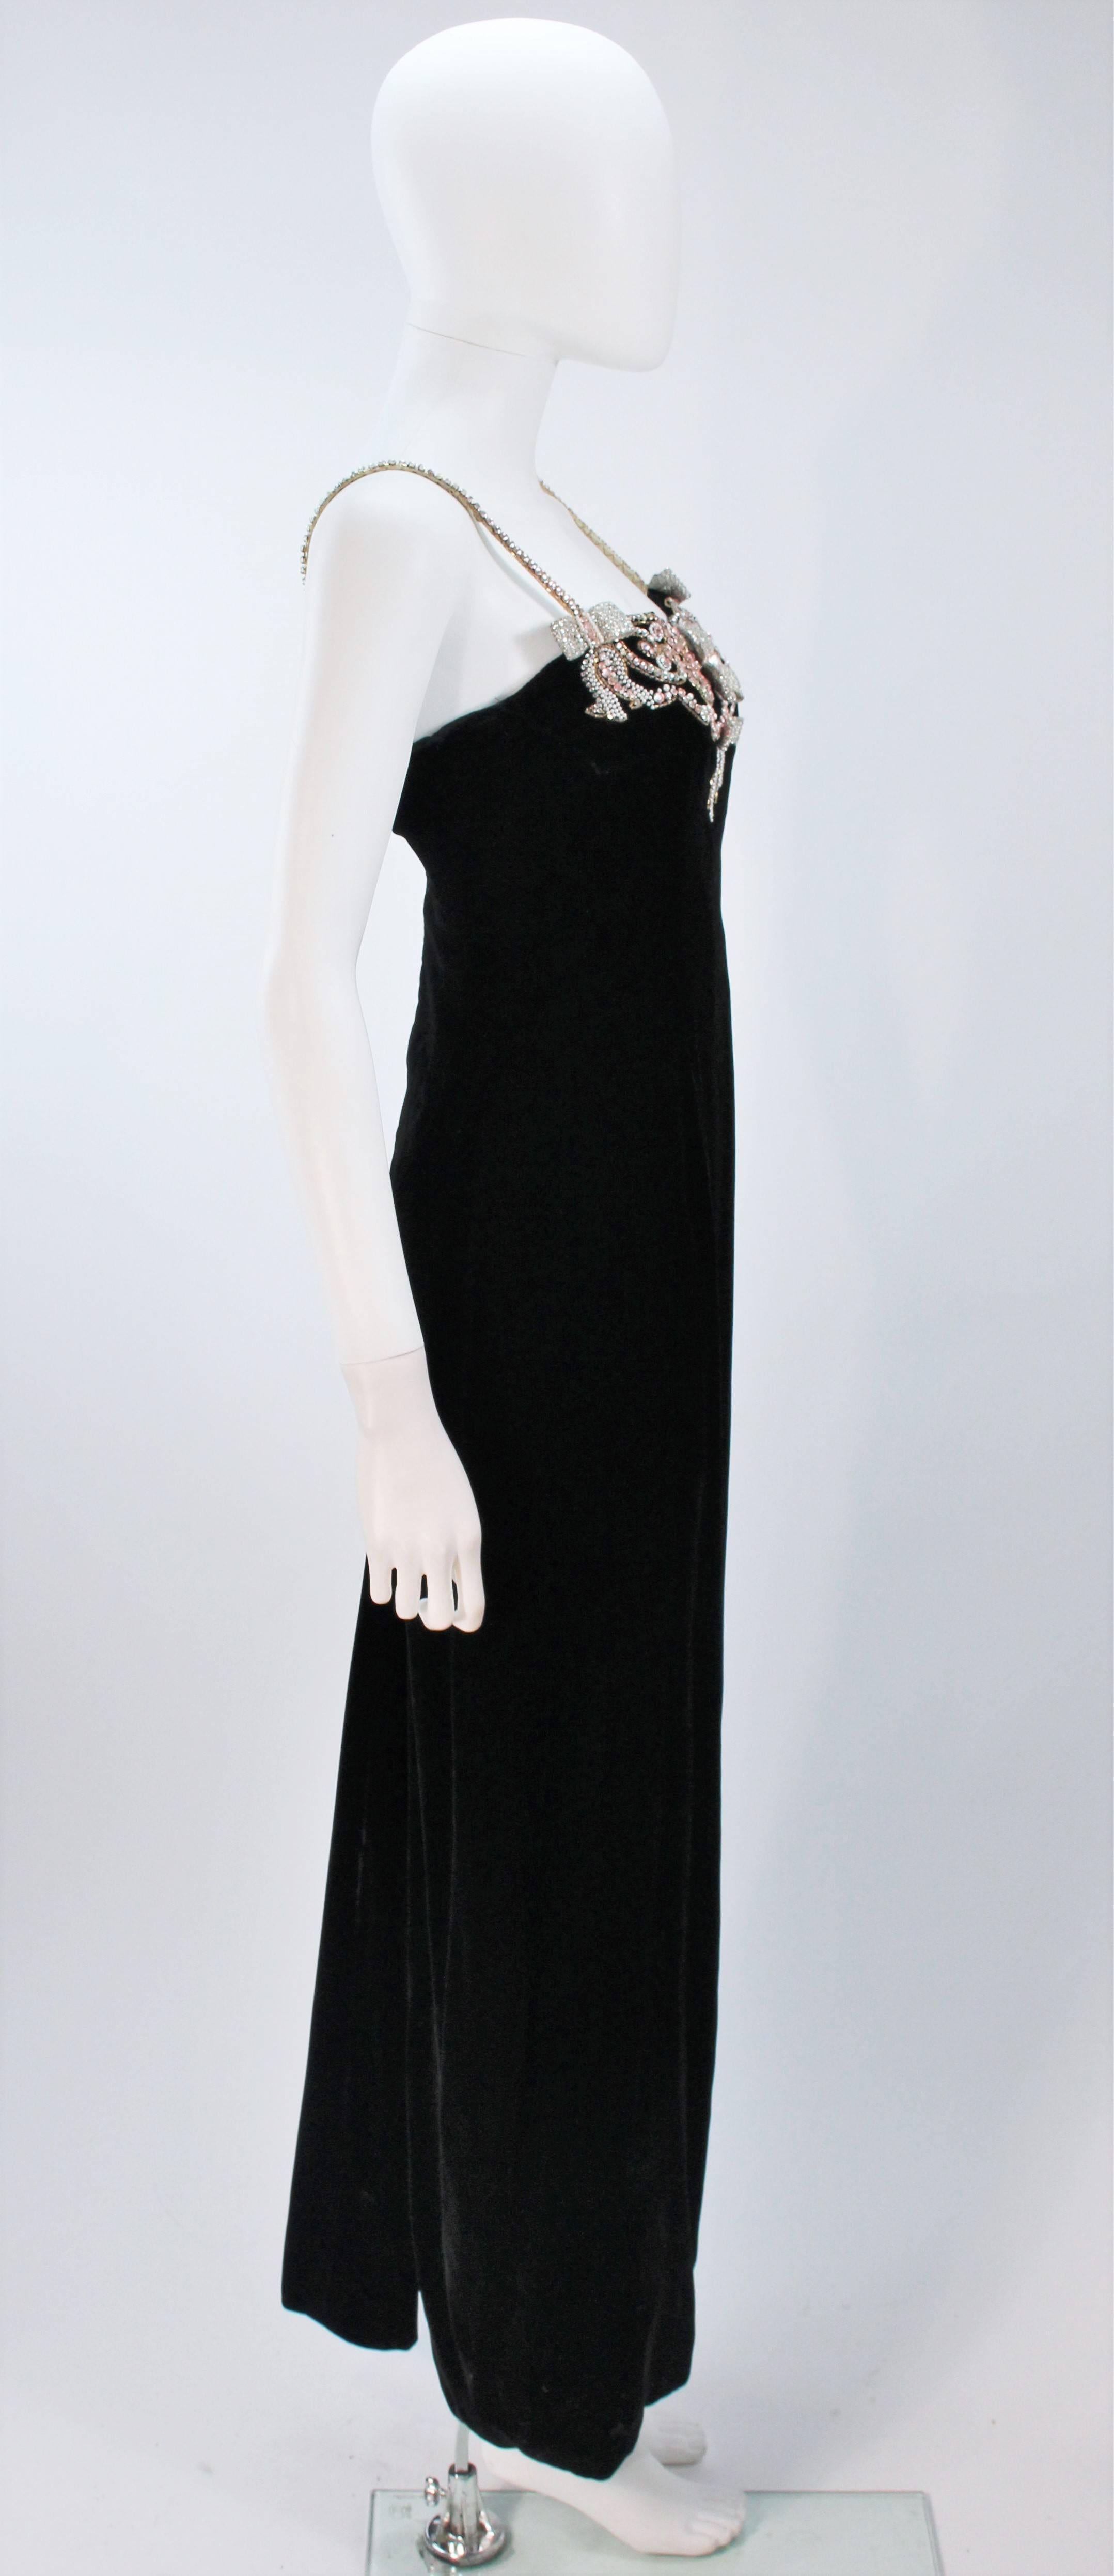 CAROLYN ROEHM Black Velvet Gown with Bows & Embellished Neckline Size 6-8 4